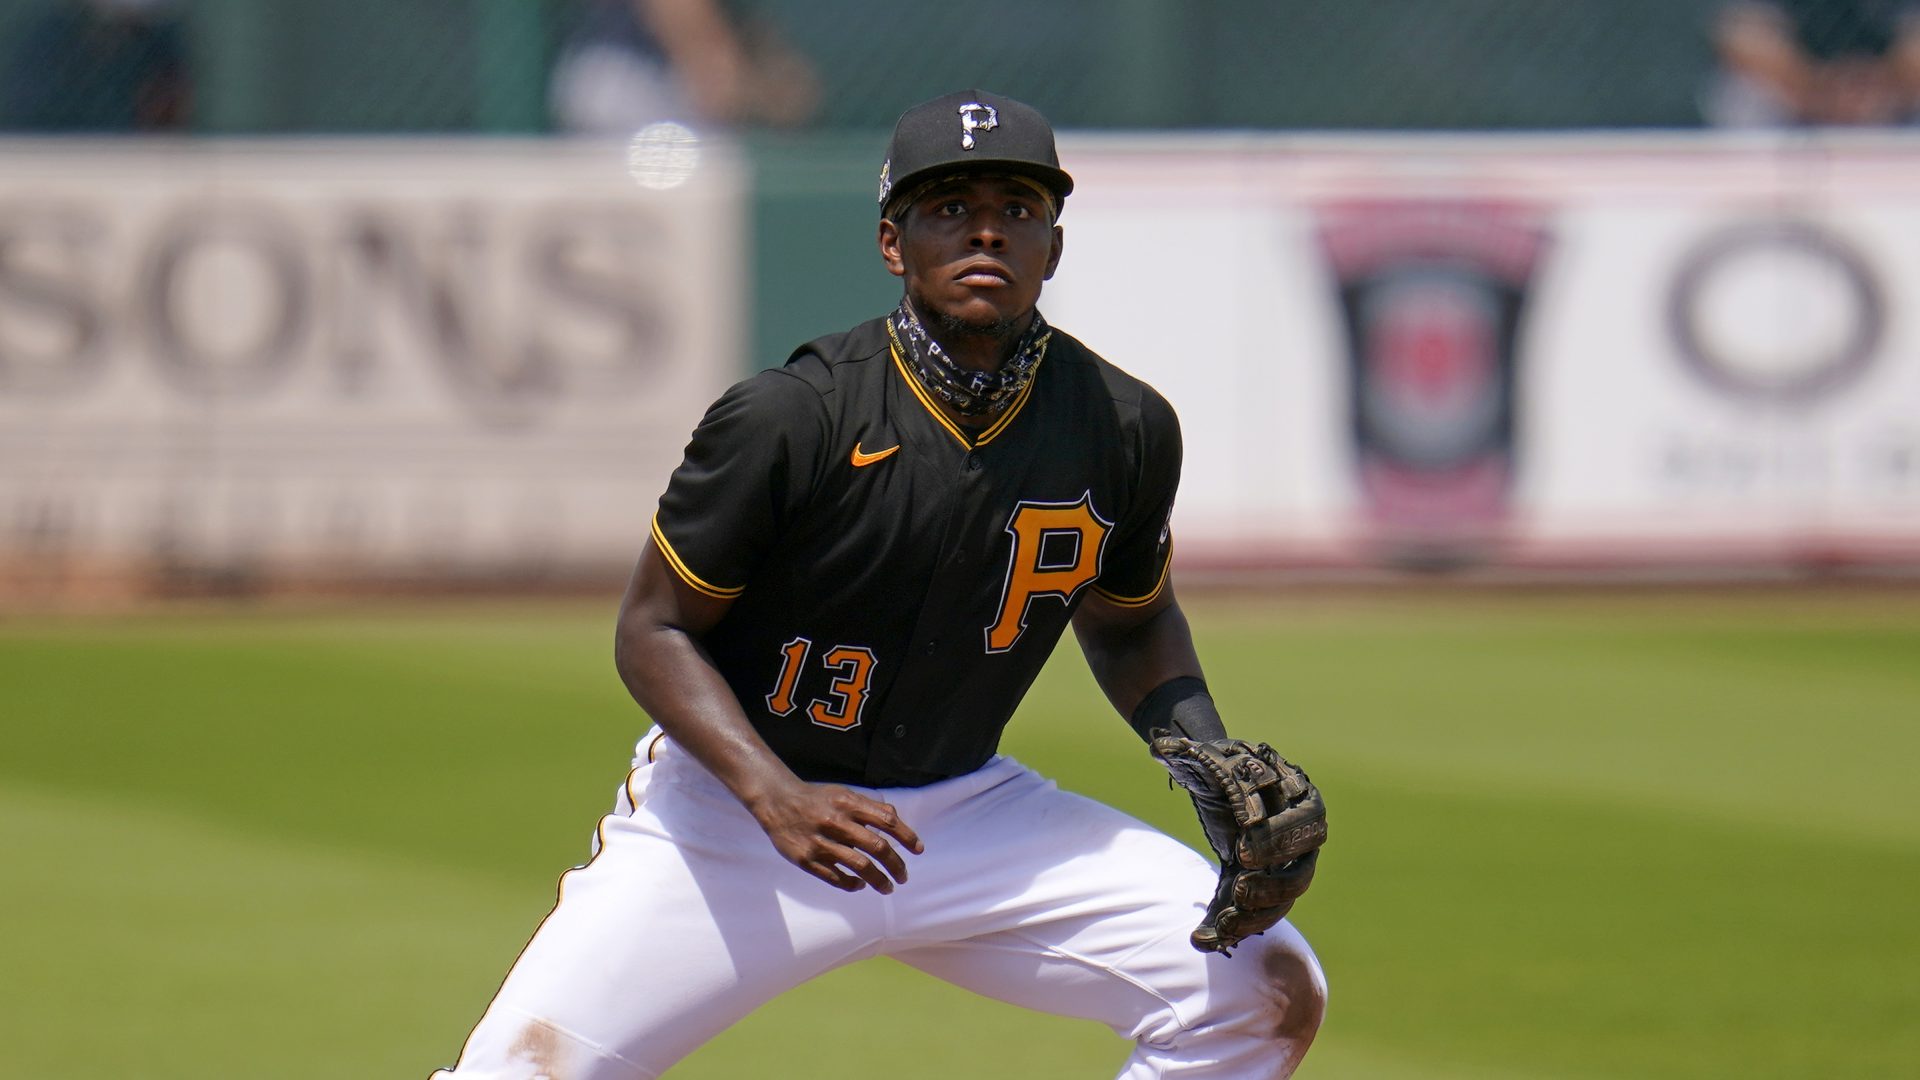 Pittsburgh Pirates third baseman Ke'Bryan Hayes in a spring training exhibition baseball game against the Detroit Tigers in Bradenton, Fla., Friday, March 26, 2021.